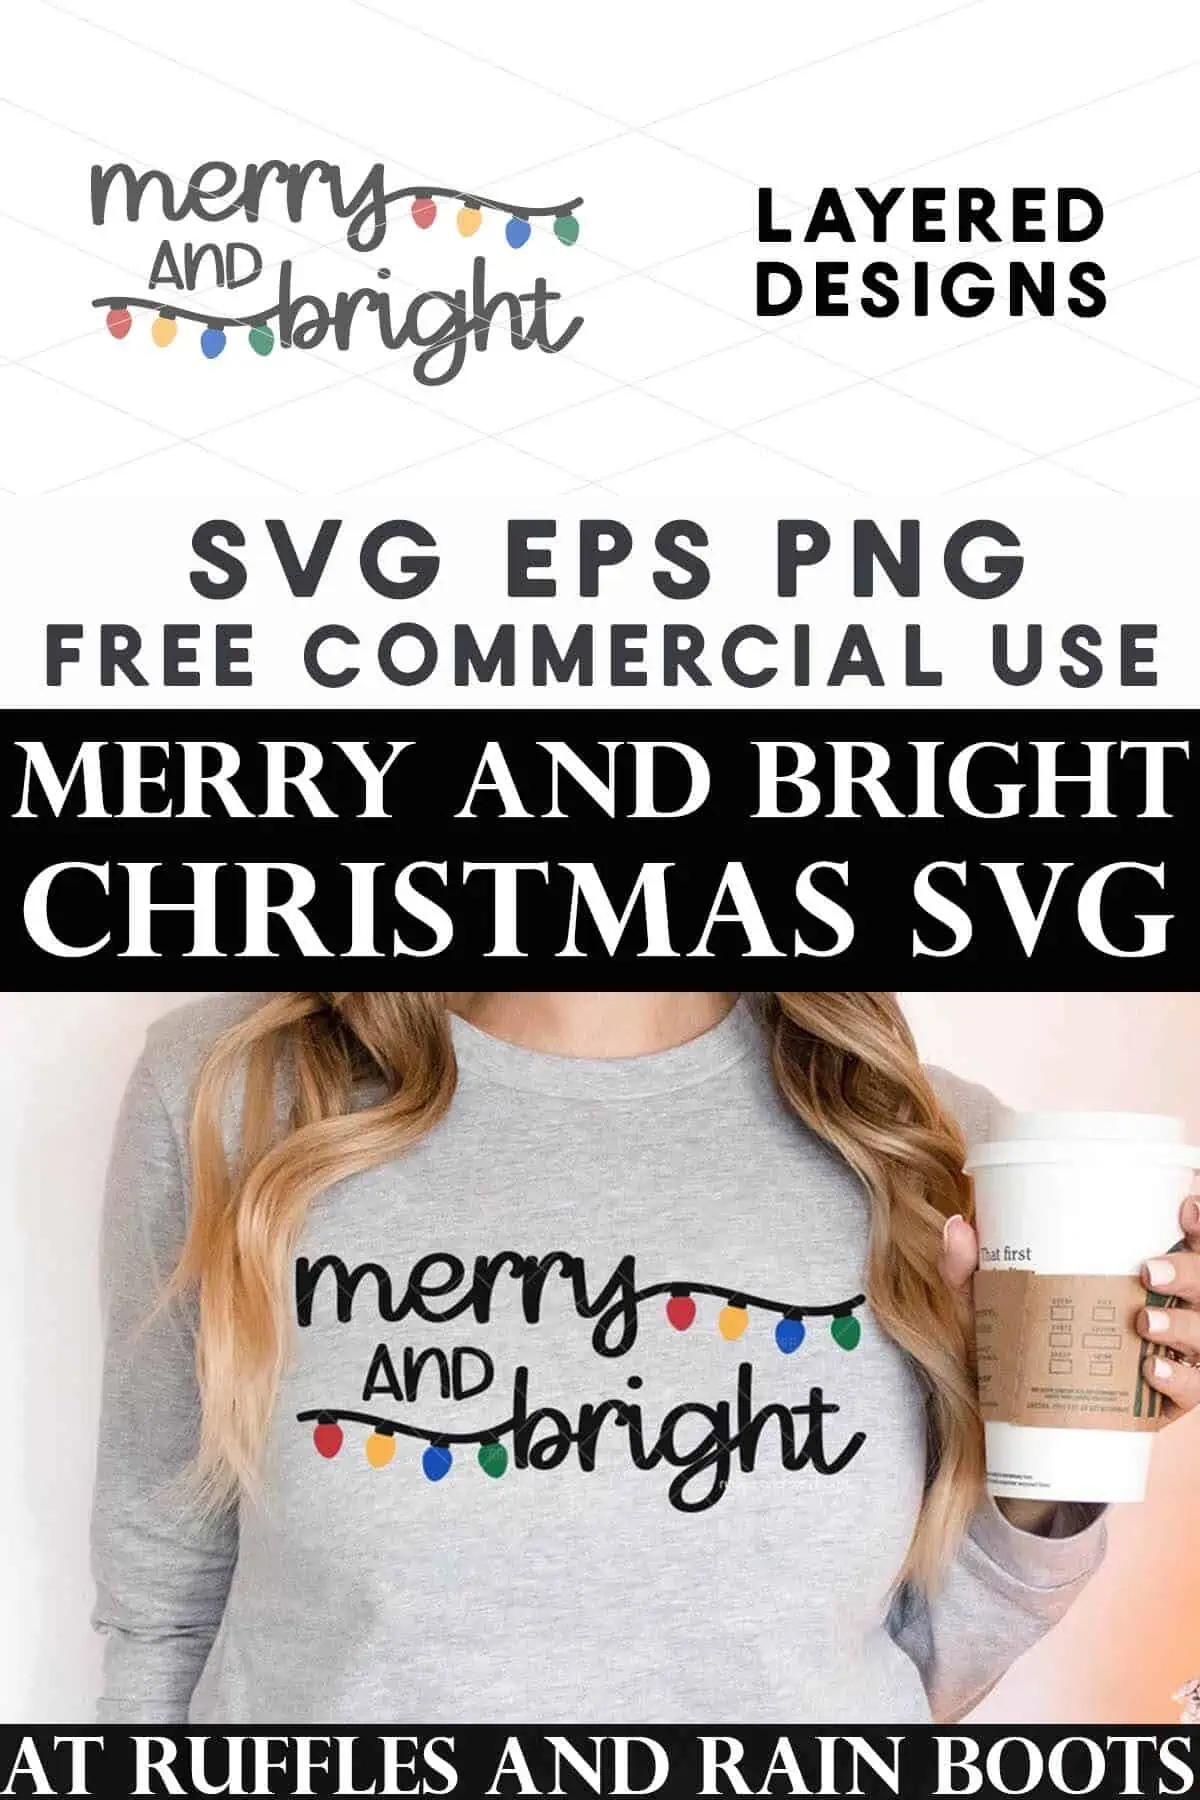 Vertical split image of woman in gray sweatshirt which reads Merry and Bright with a Christmas lights design.